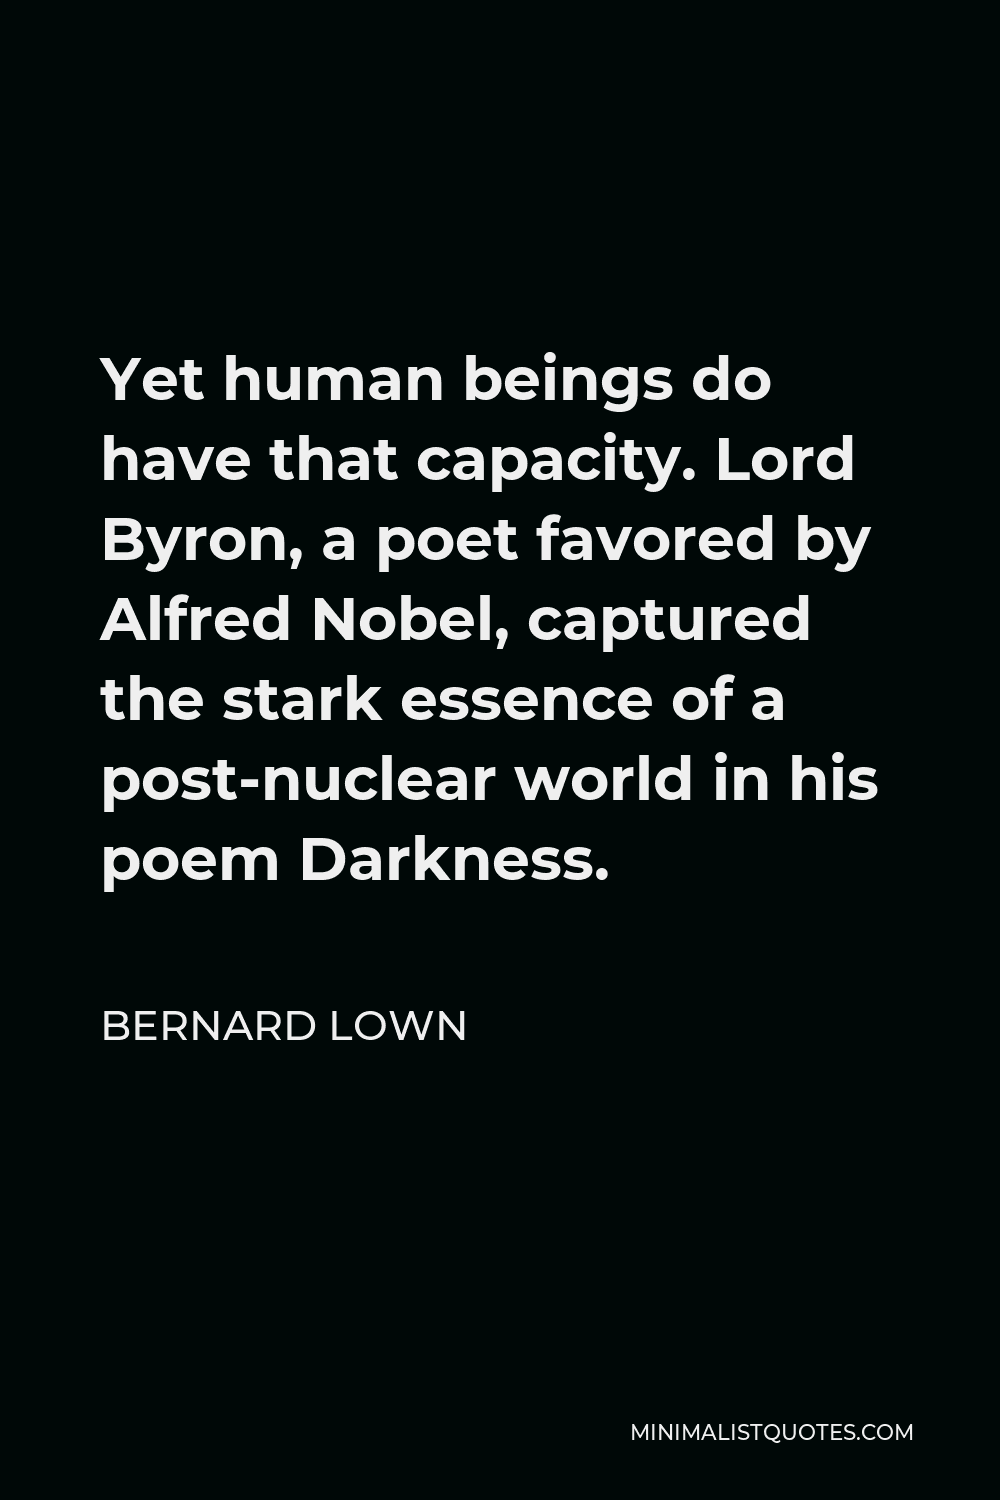 Bernard Lown Quote - Yet human beings do have that capacity. Lord Byron, a poet favored by Alfred Nobel, captured the stark essence of a post-nuclear world in his poem Darkness.